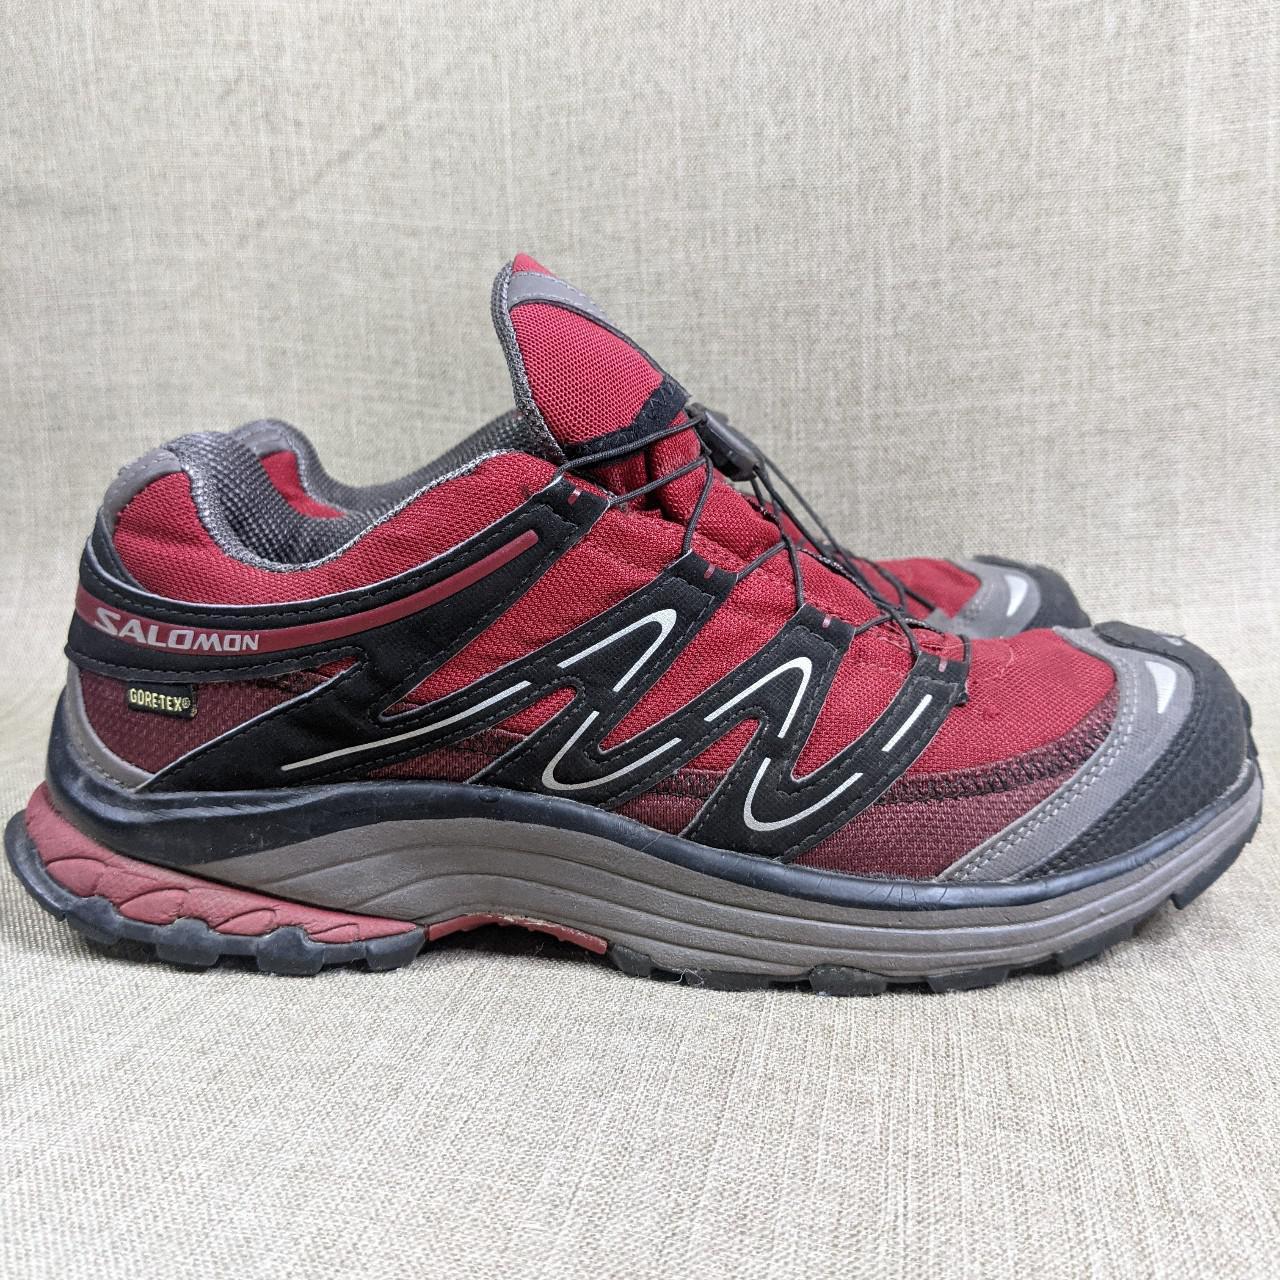 Product Image 3 - Salomon chunky sneakers. Women's size